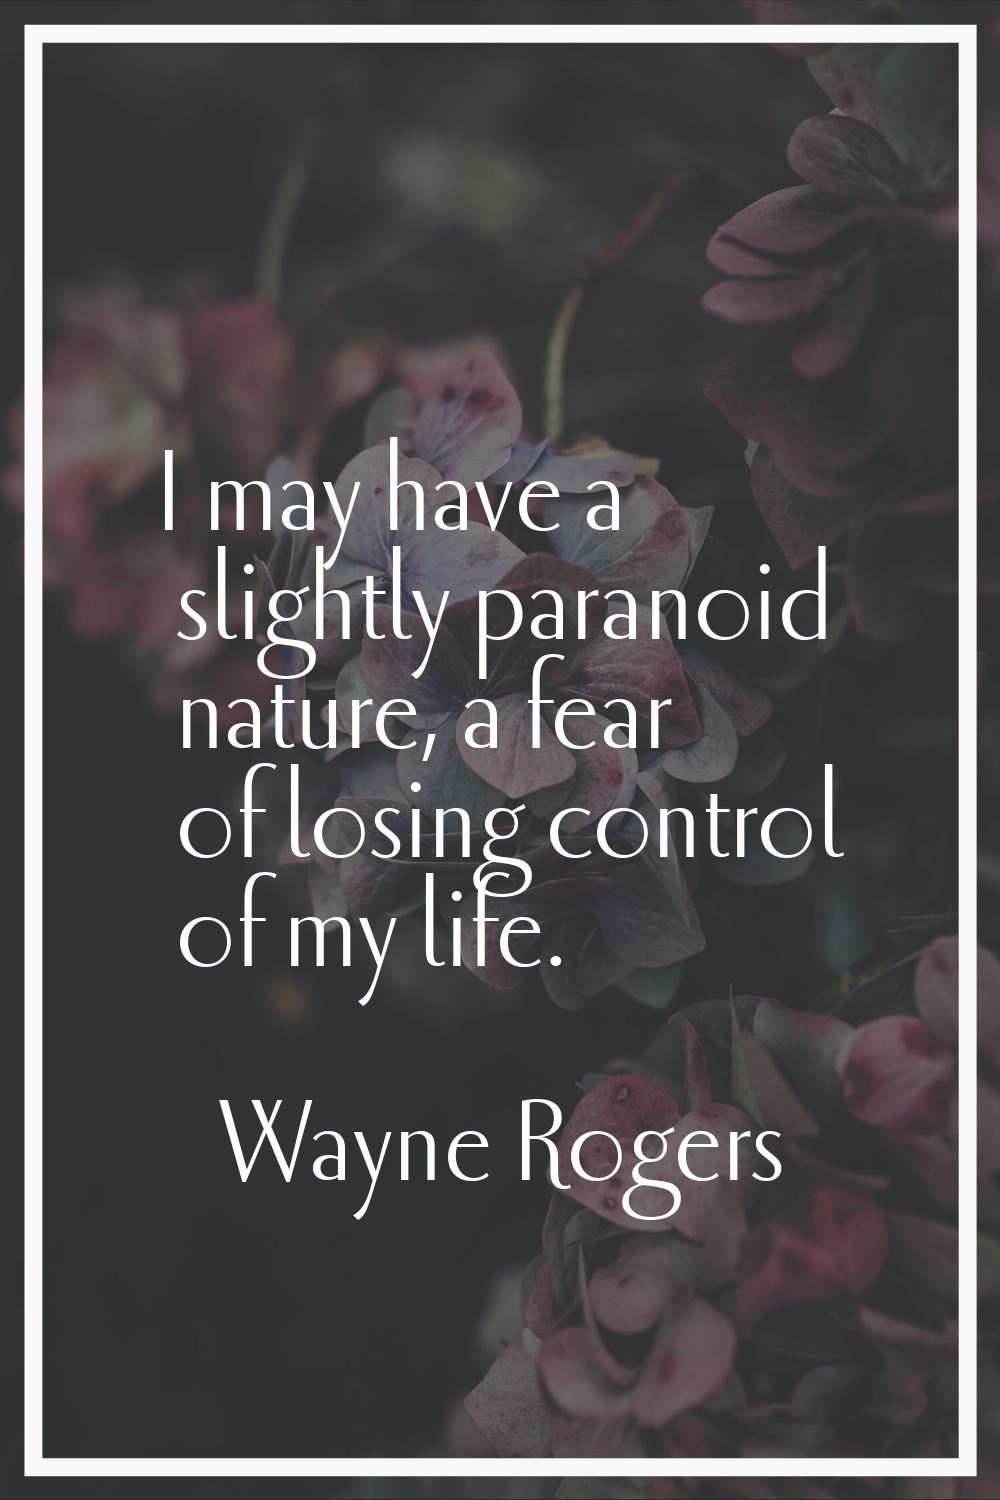 I may have a slightly paranoid nature, a fear of losing control of my life.